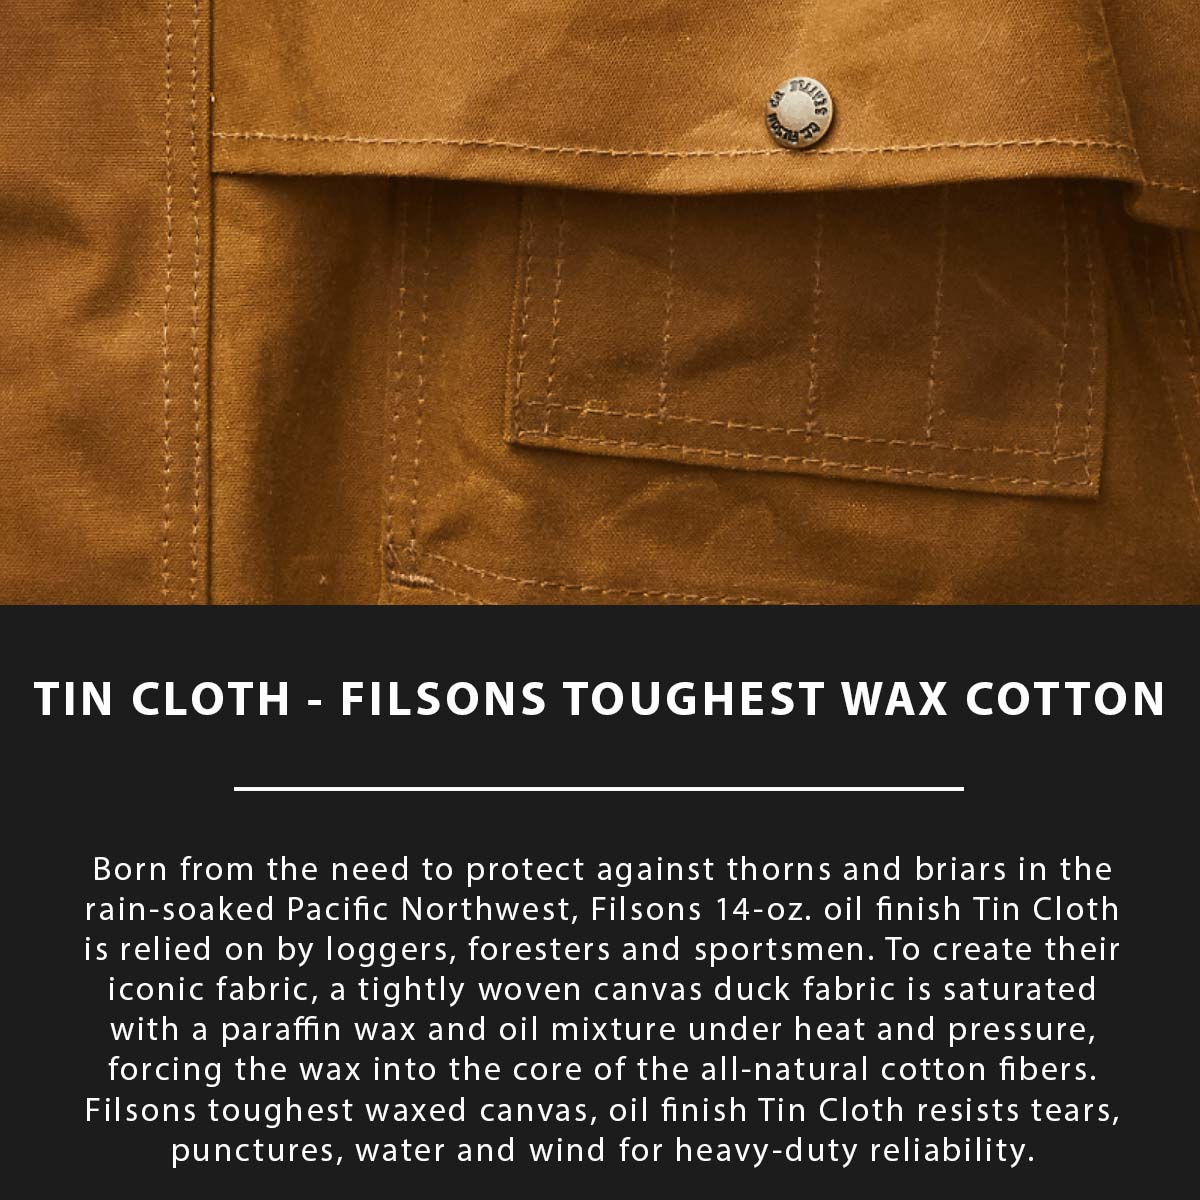 Filson Tin Cloth Field Jacket Dark Tan, made of the legendary super strong, lightweight, and oil impregnated 14-oz. Tin Cloth canvas